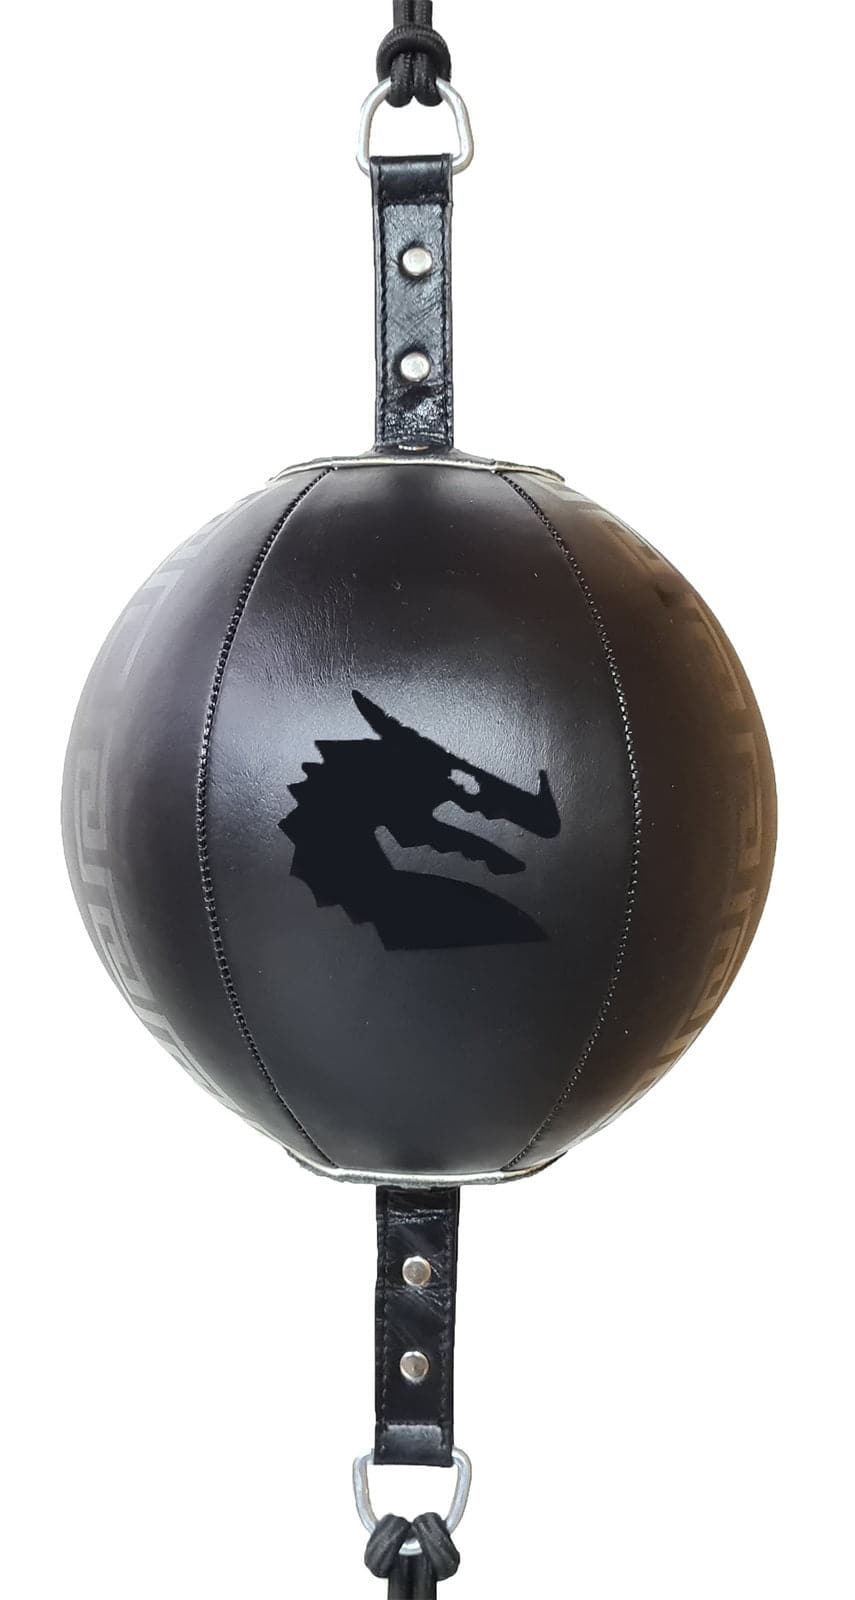 MORGAN B2 BOMBER 8" LEATHER FLOOR TO CEILING BALL + ADJUSTABLE STRAPS